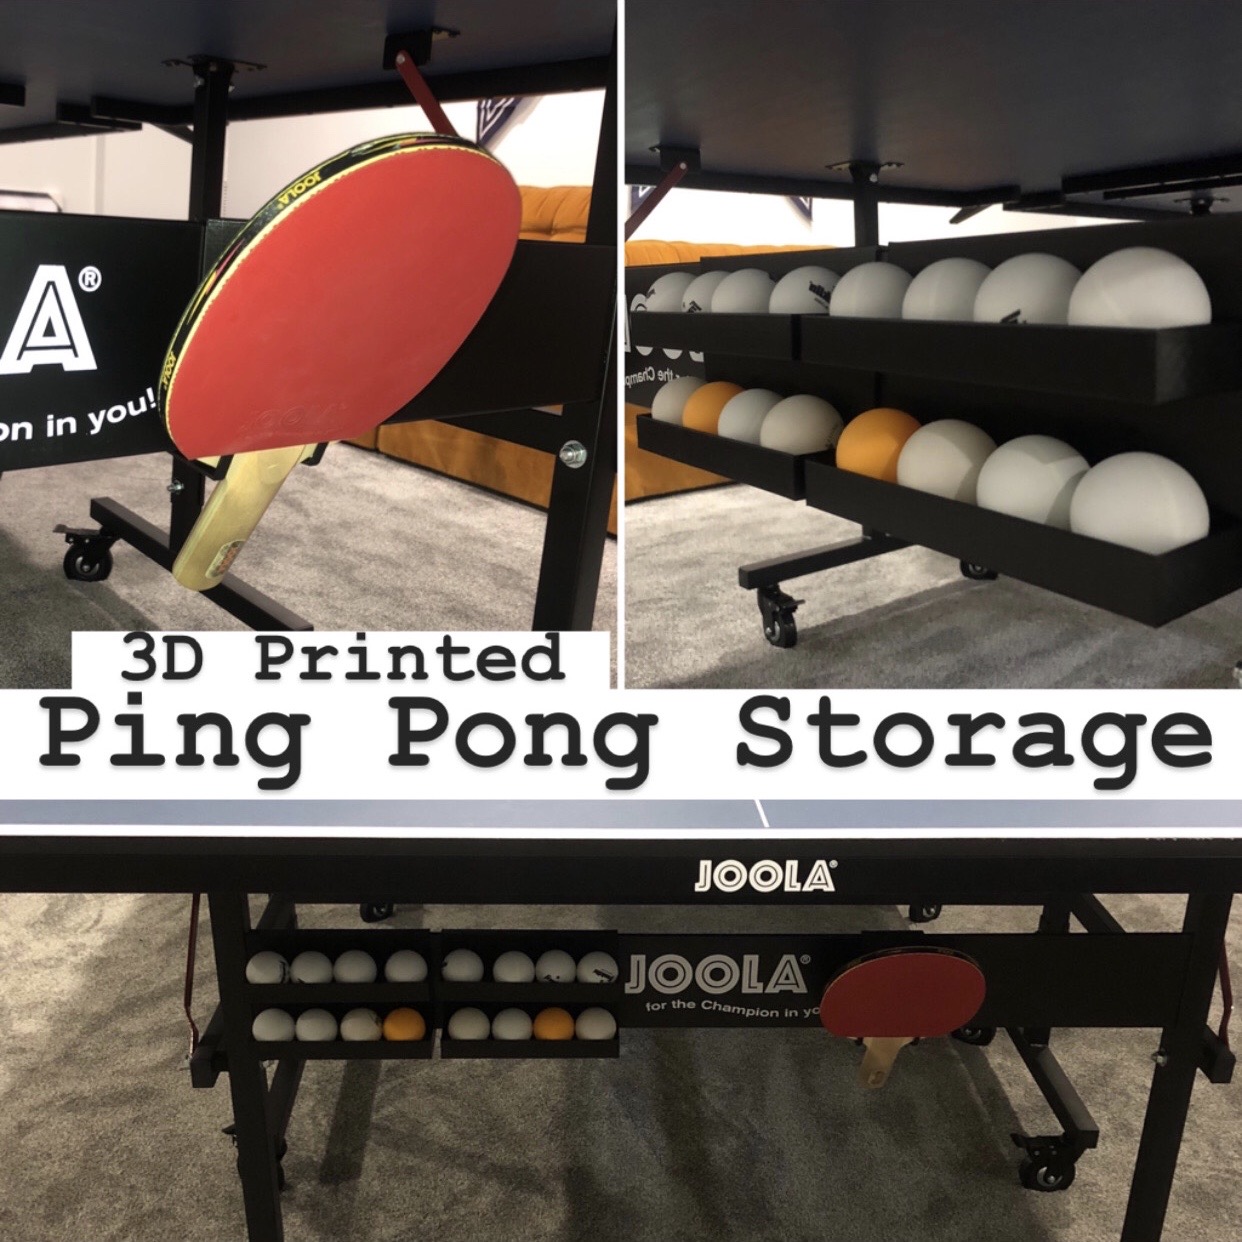 Ping Pong Storage Under Table